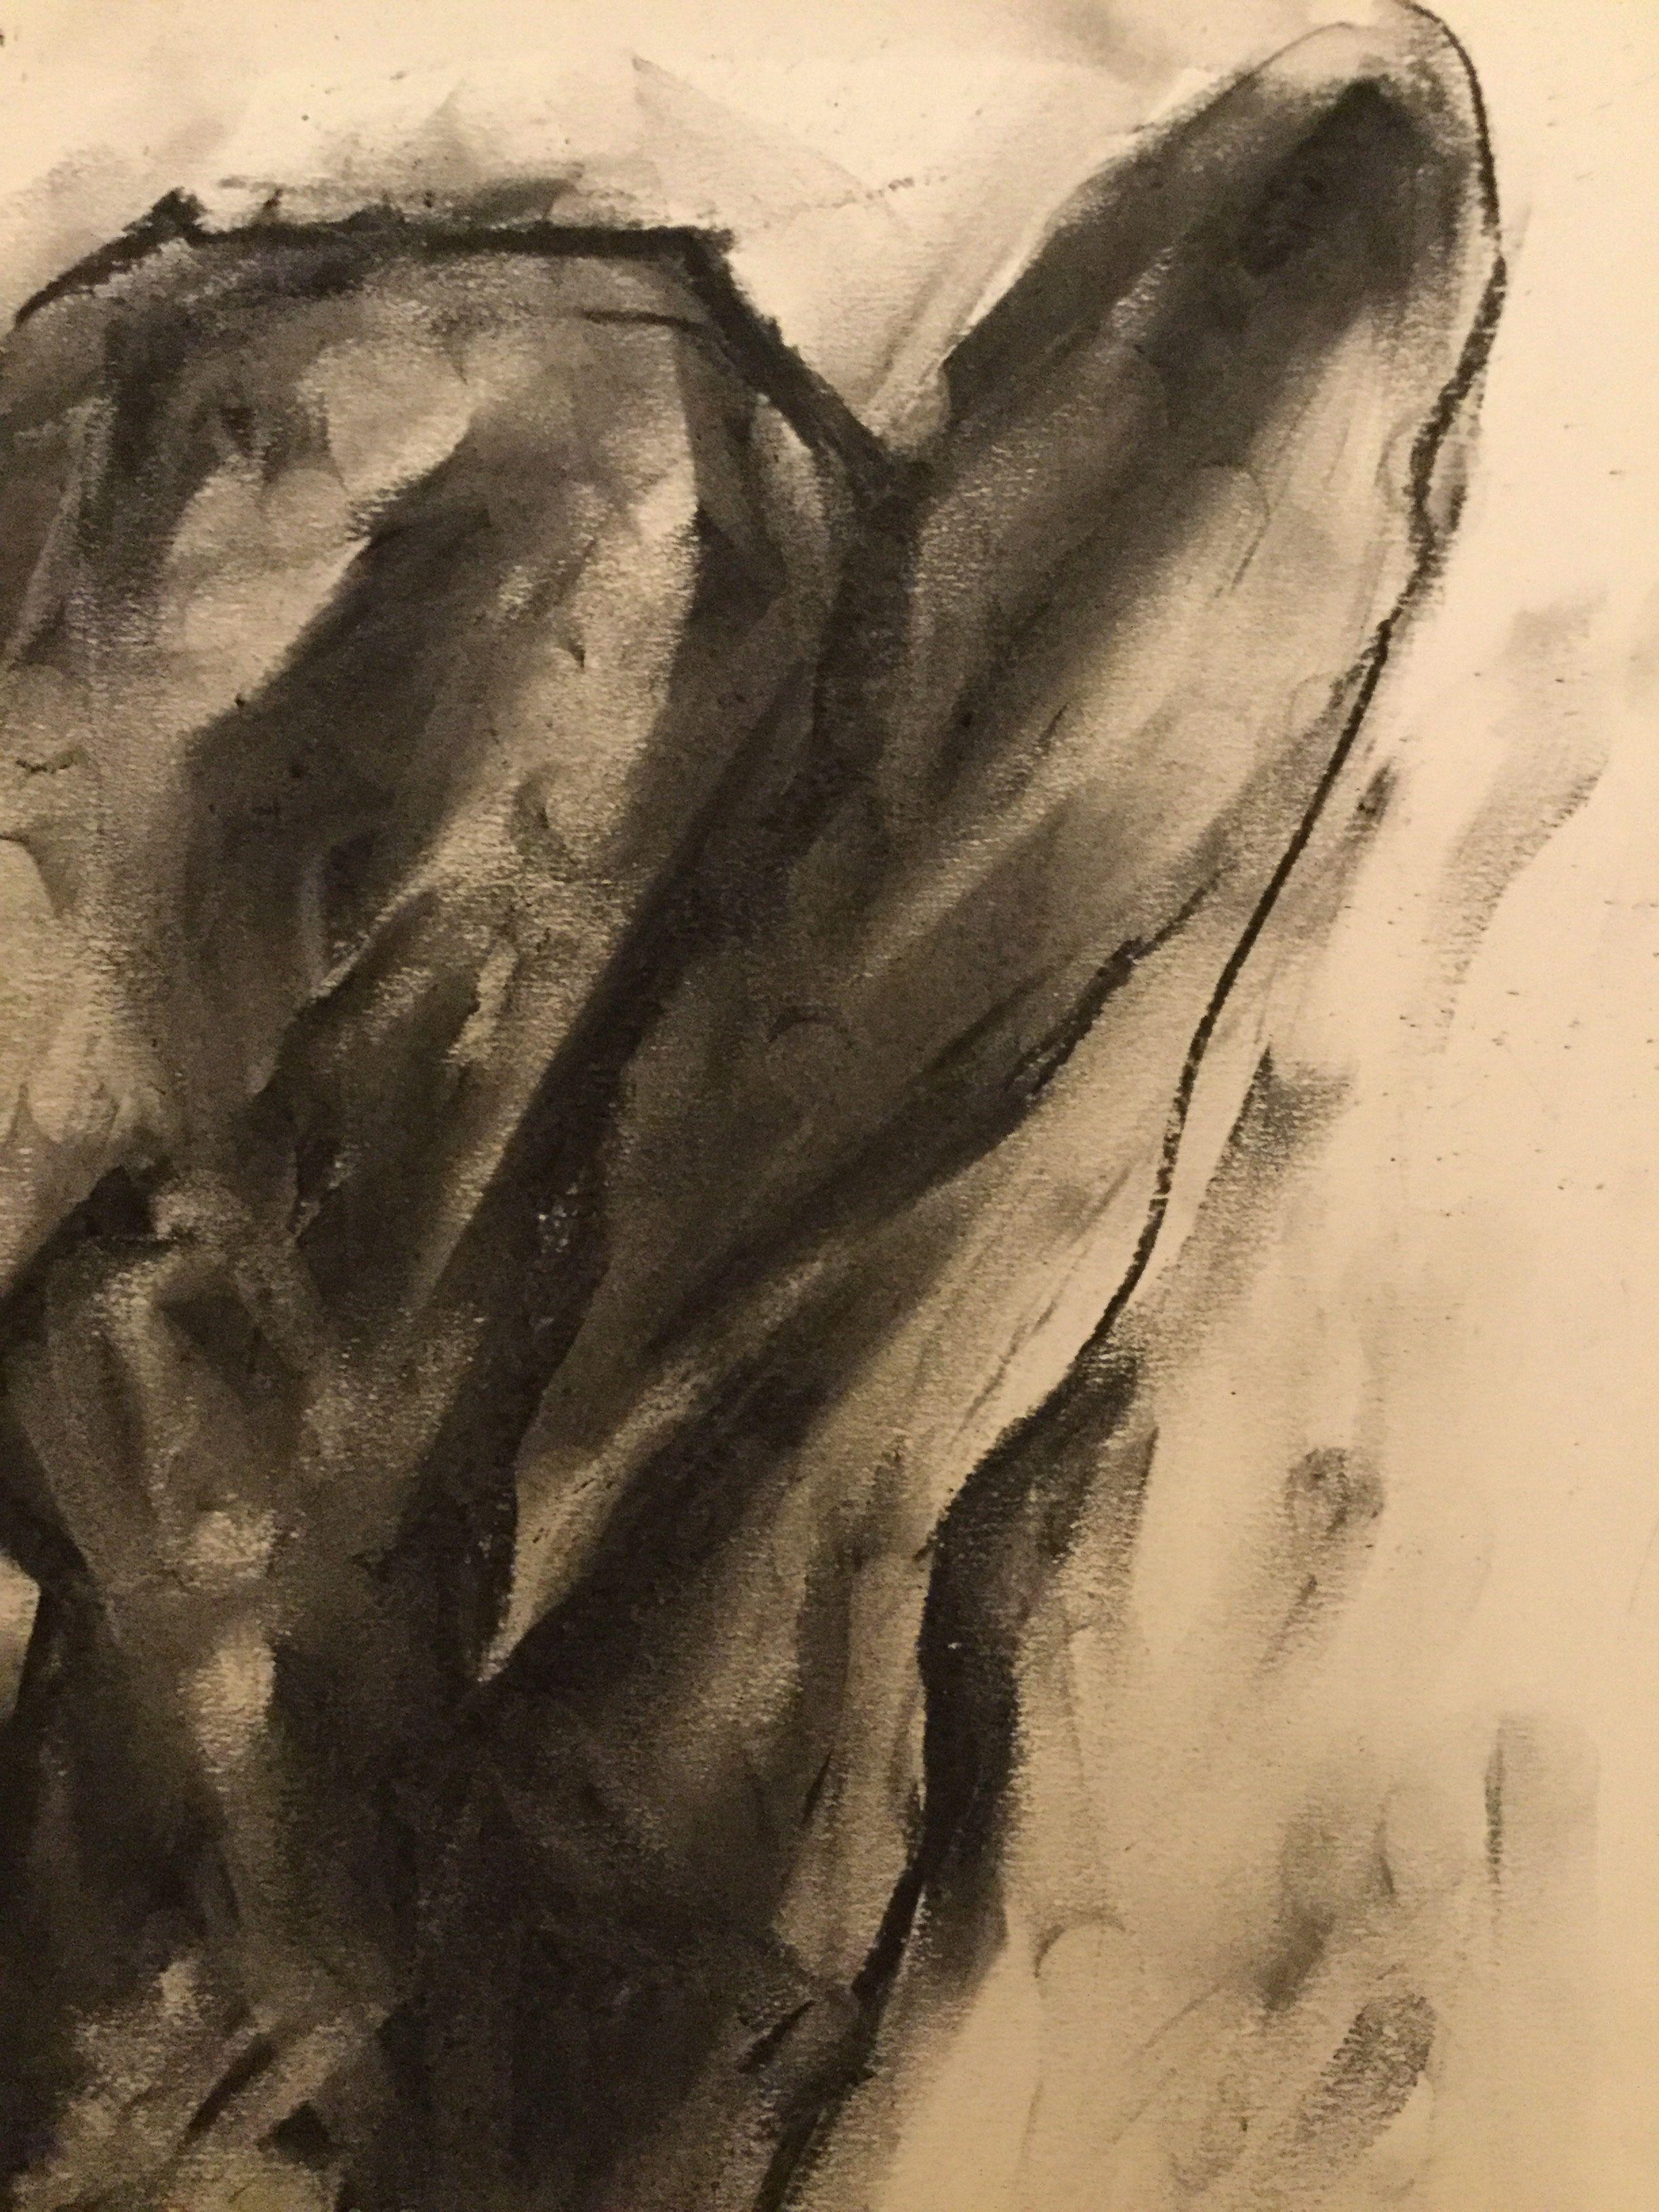 More, Drawing, Charcoal on Paper - Impressionist Art by James Shipton